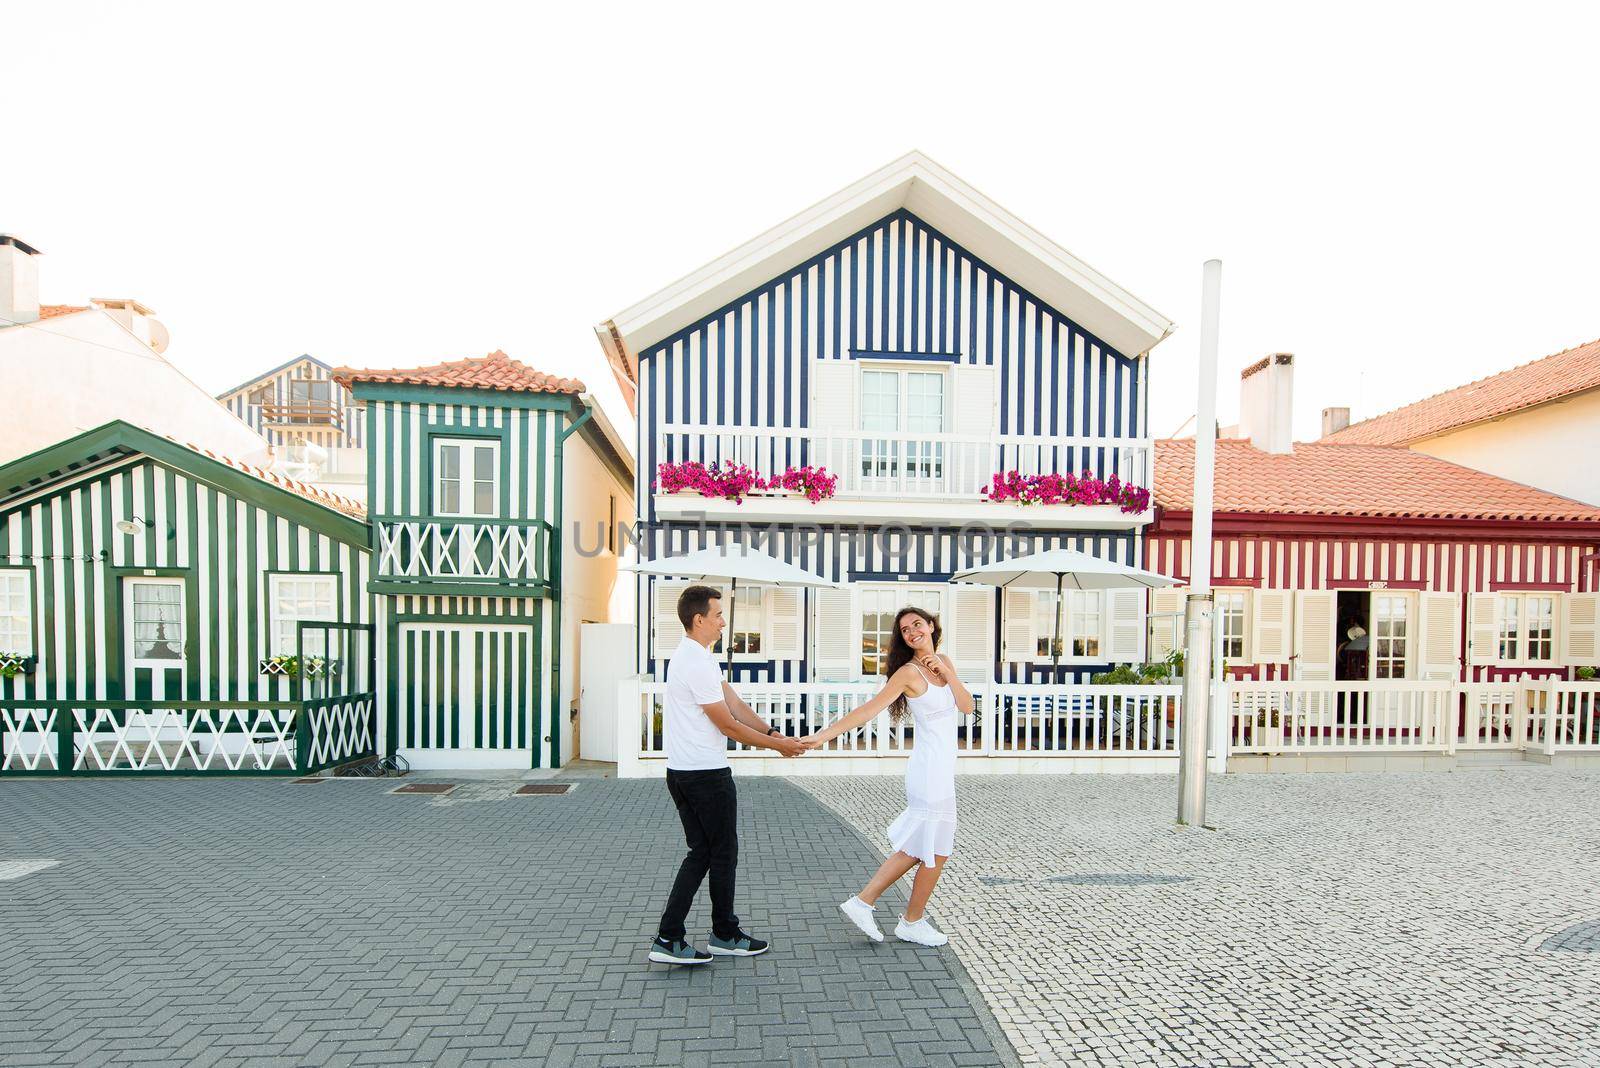 Young couple in white clothes walks around street in Aveiro, Portugal near colourful and peaceful houses. Lifestyle. Having fun, laughs, smiles. by Rabizo